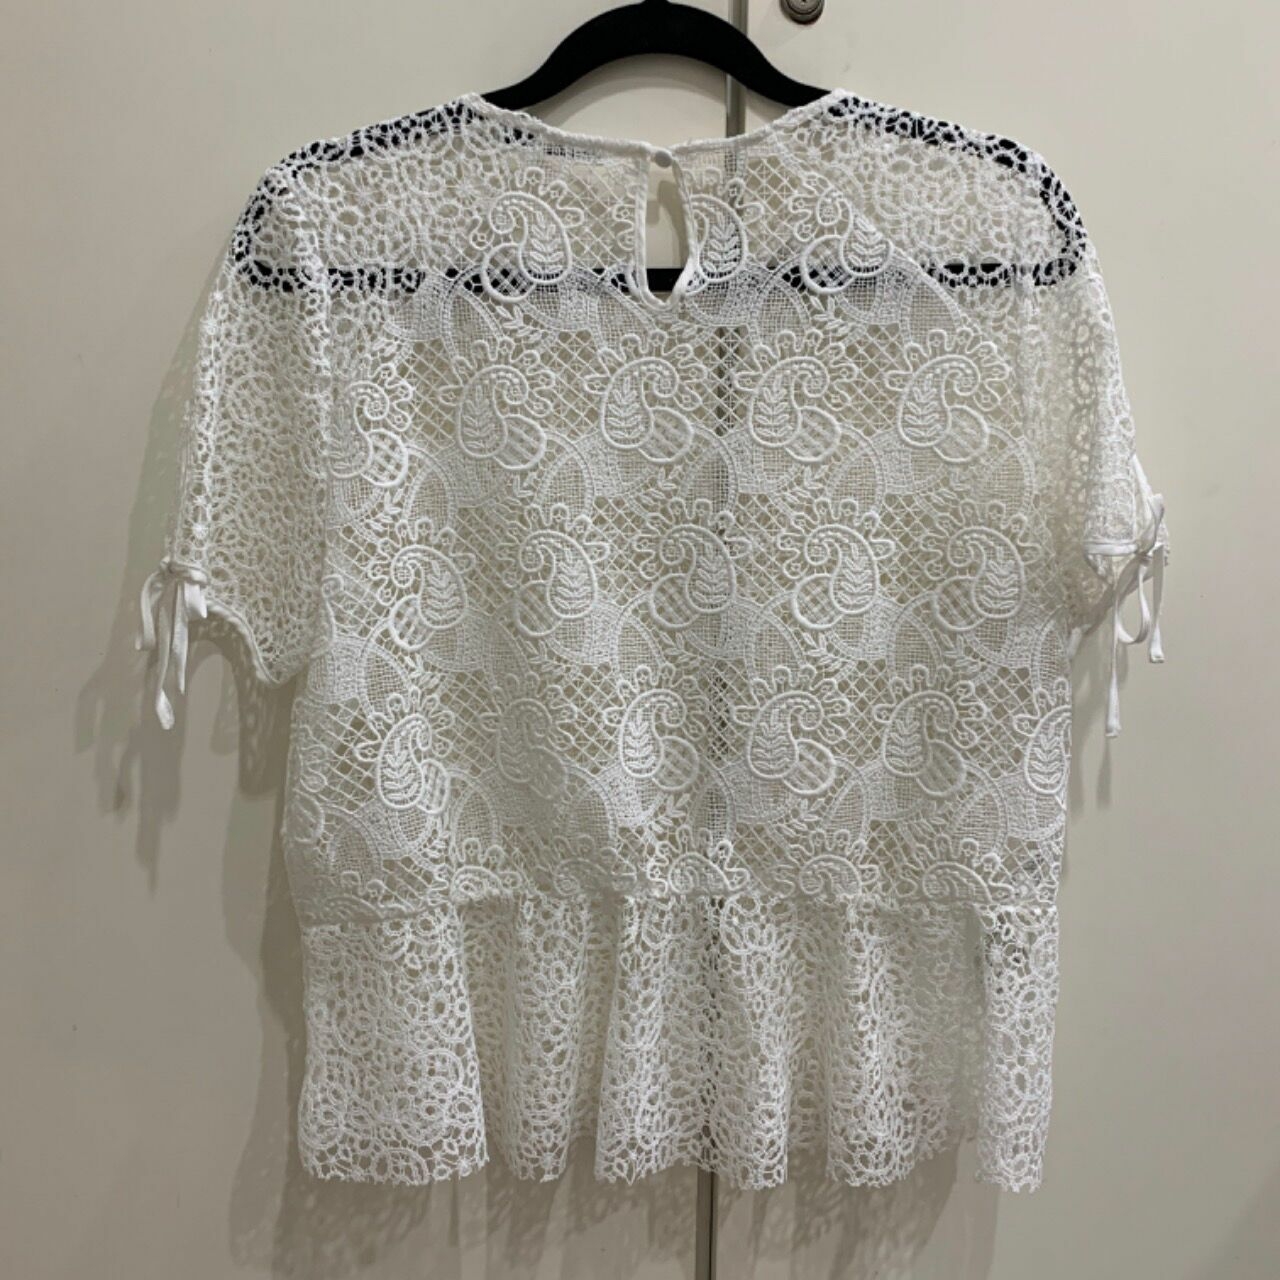 Zara White Embroidery Lace Peplum with Bow Sleeves Blouse